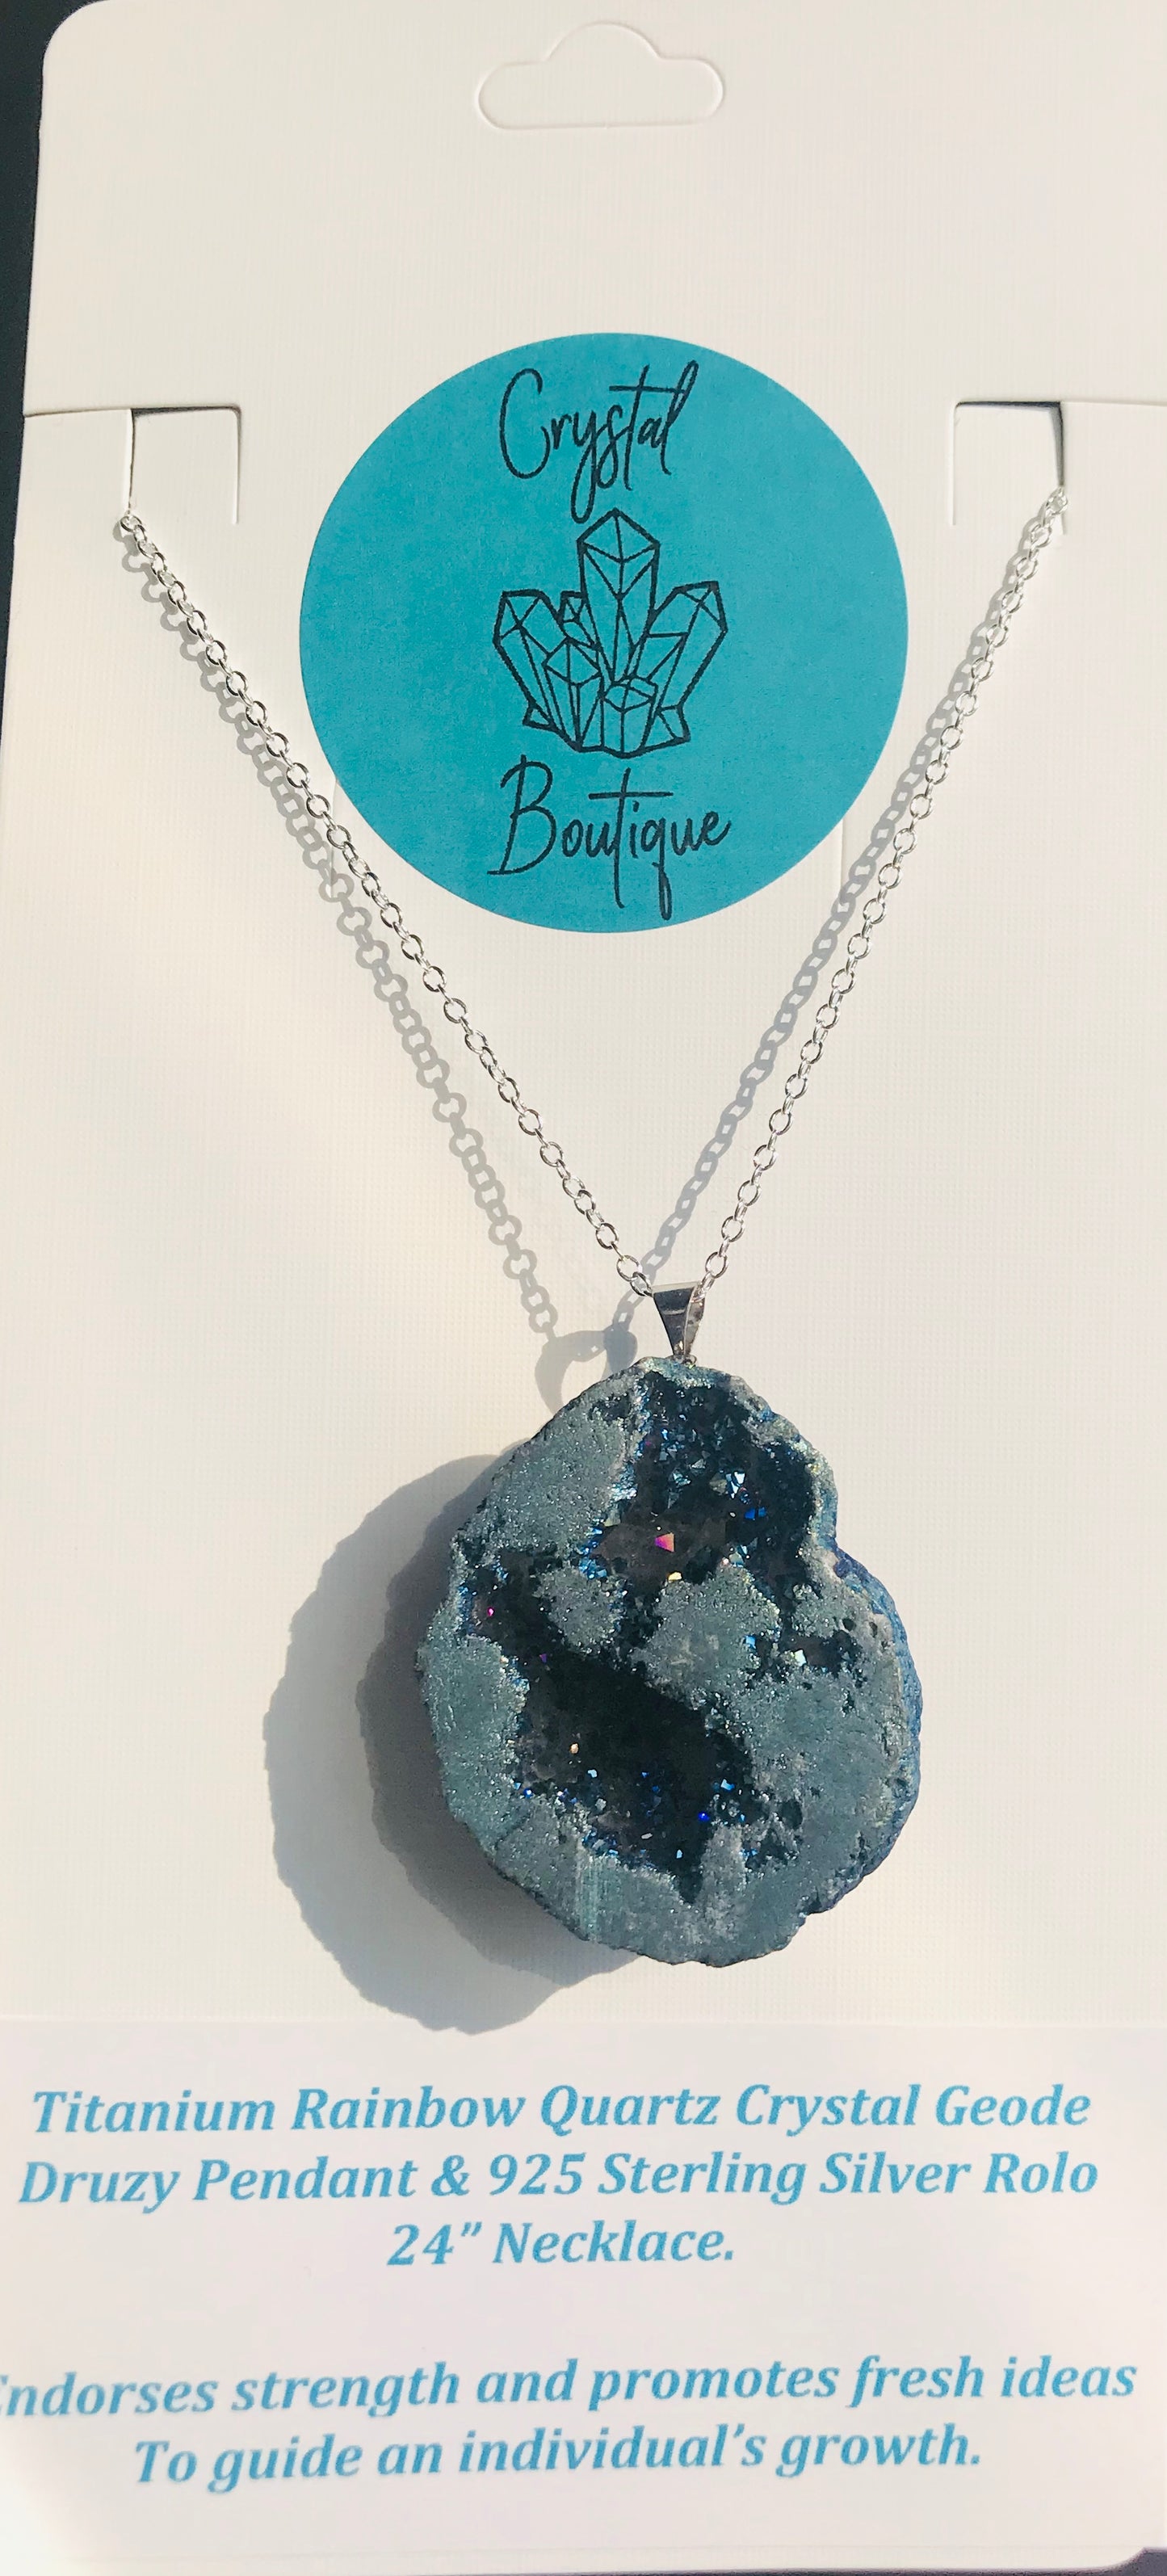 Druzy Crystal Healing Aura Geode Pendant & 925 Silver Rolo Necklace - Rainbow - Crystal Boutique.co.uk 